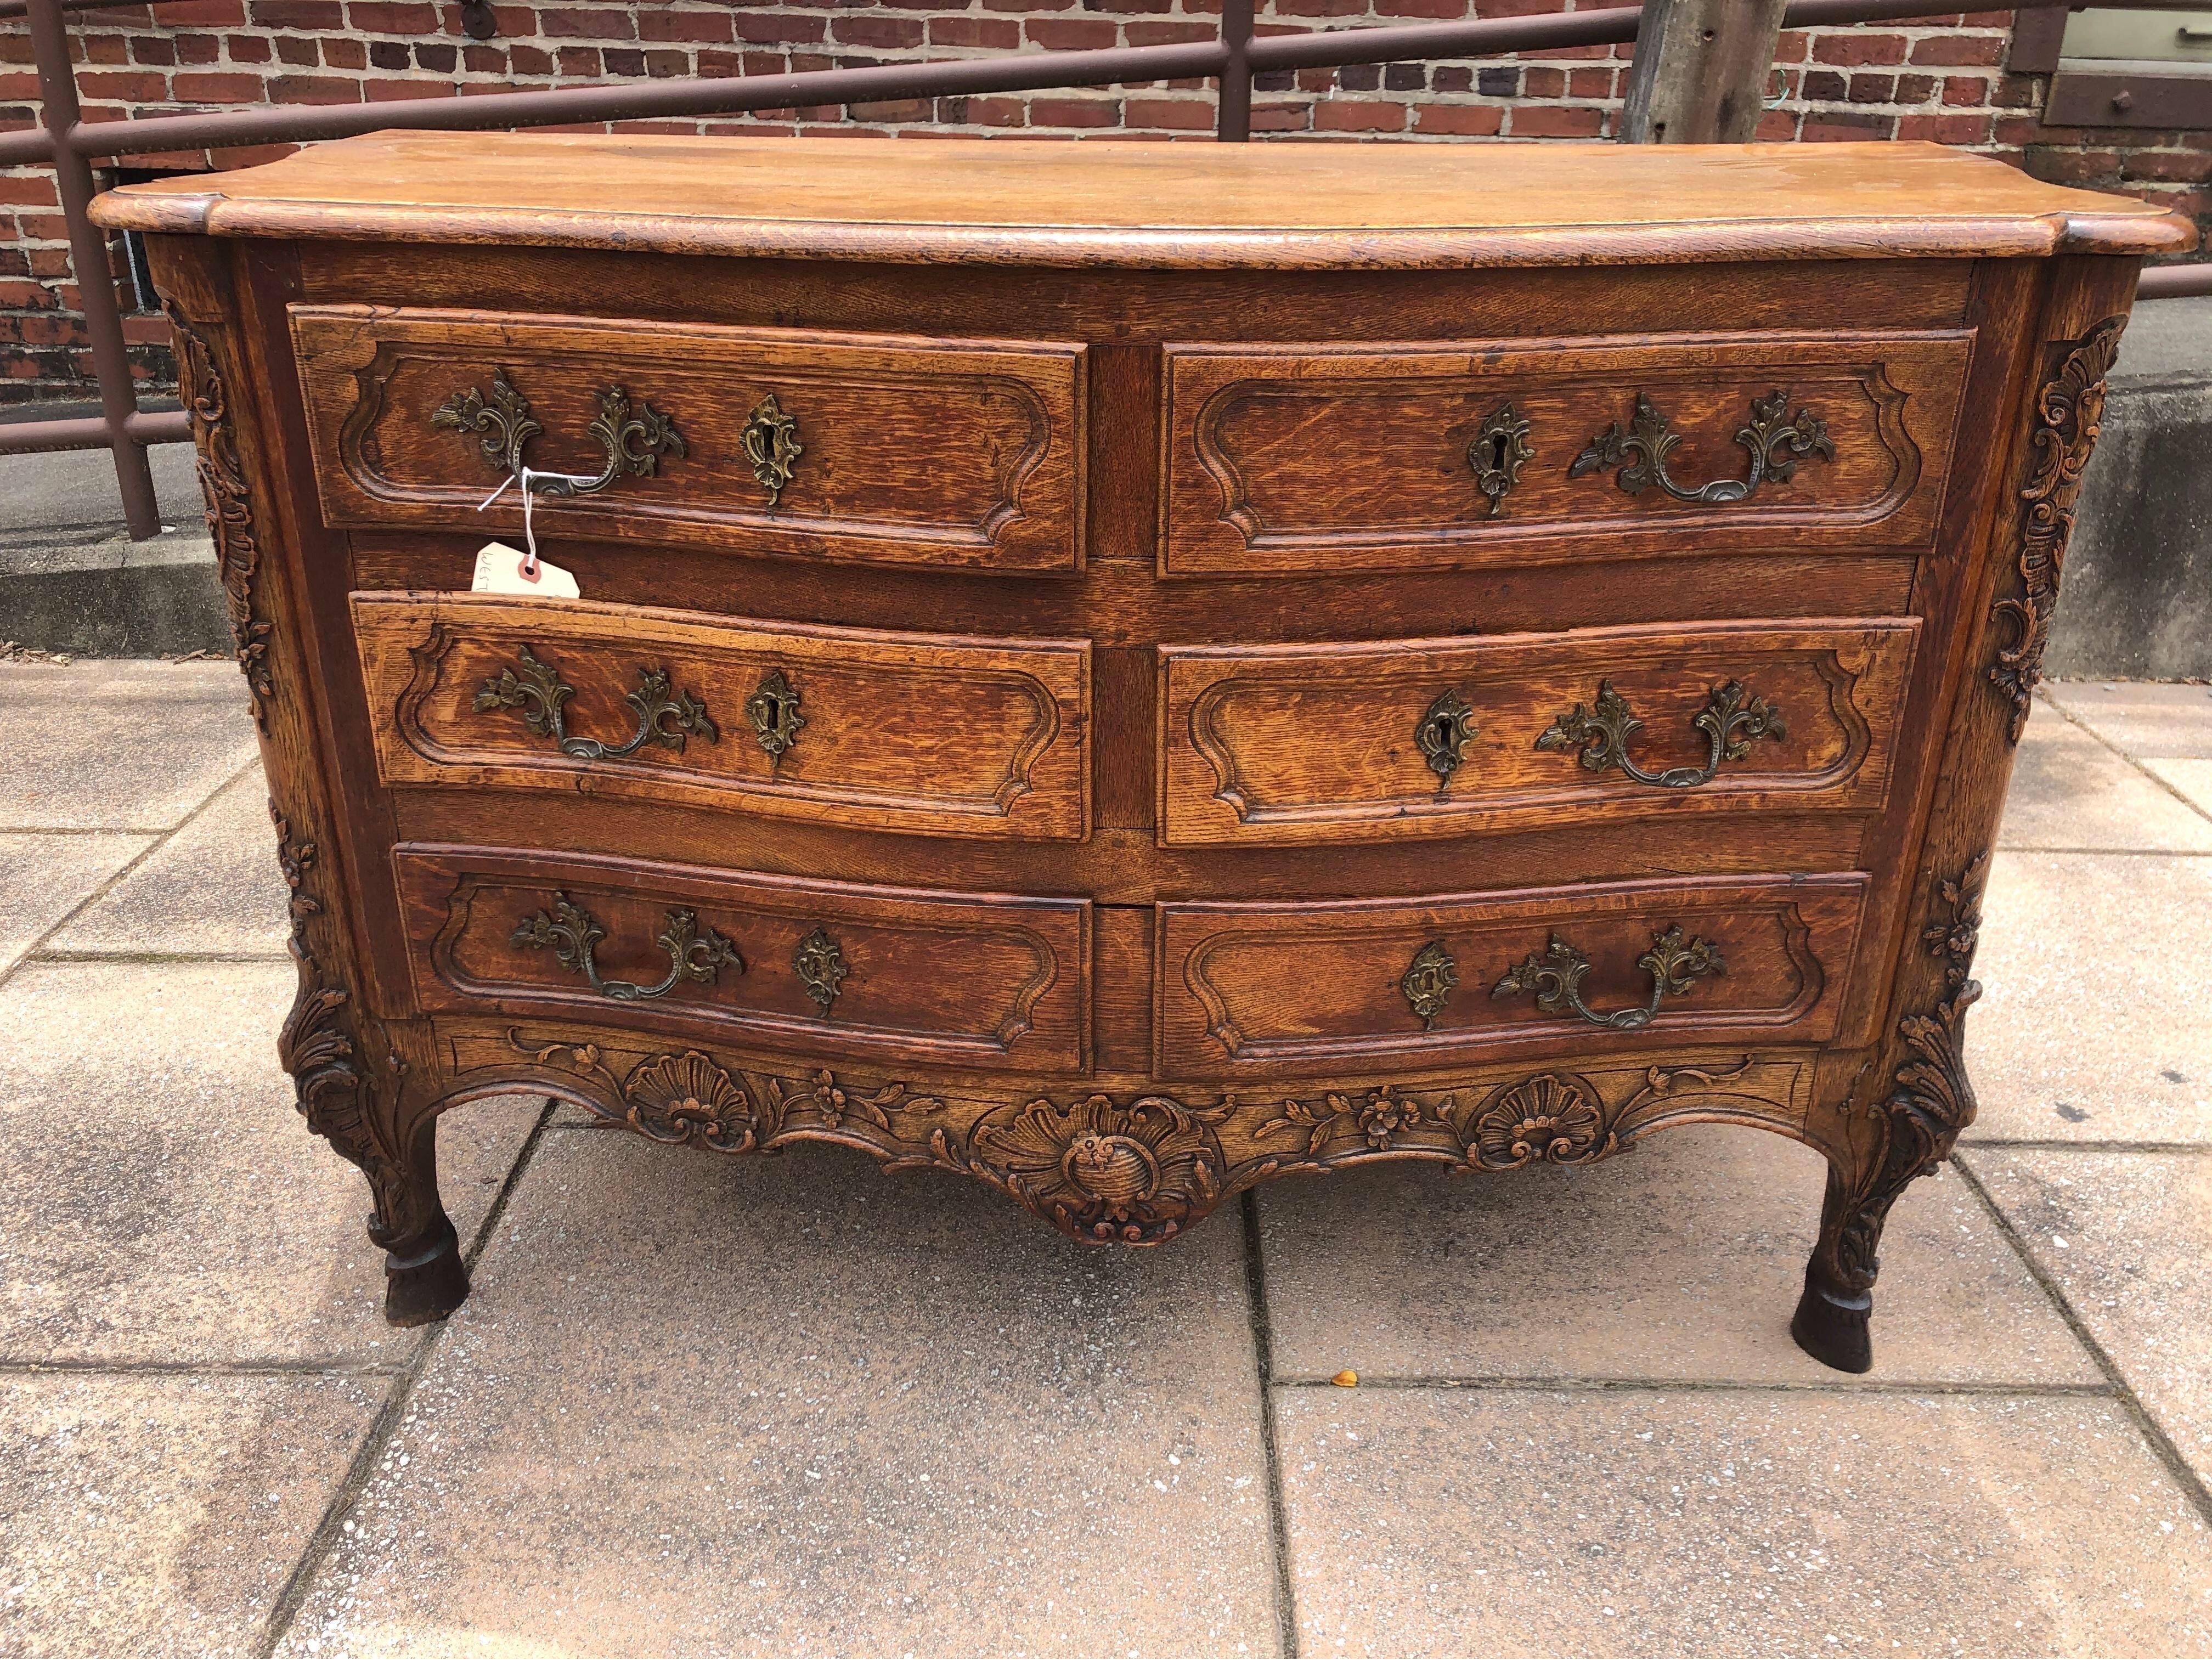 18th century French carved oak serpentine commode on hoof feet. 4 smaller drawers over one larger drawer with handsomely carved apron, knees and feet. Scrolls, foliage and shells carved throughout and resting on well defined hoof feet.